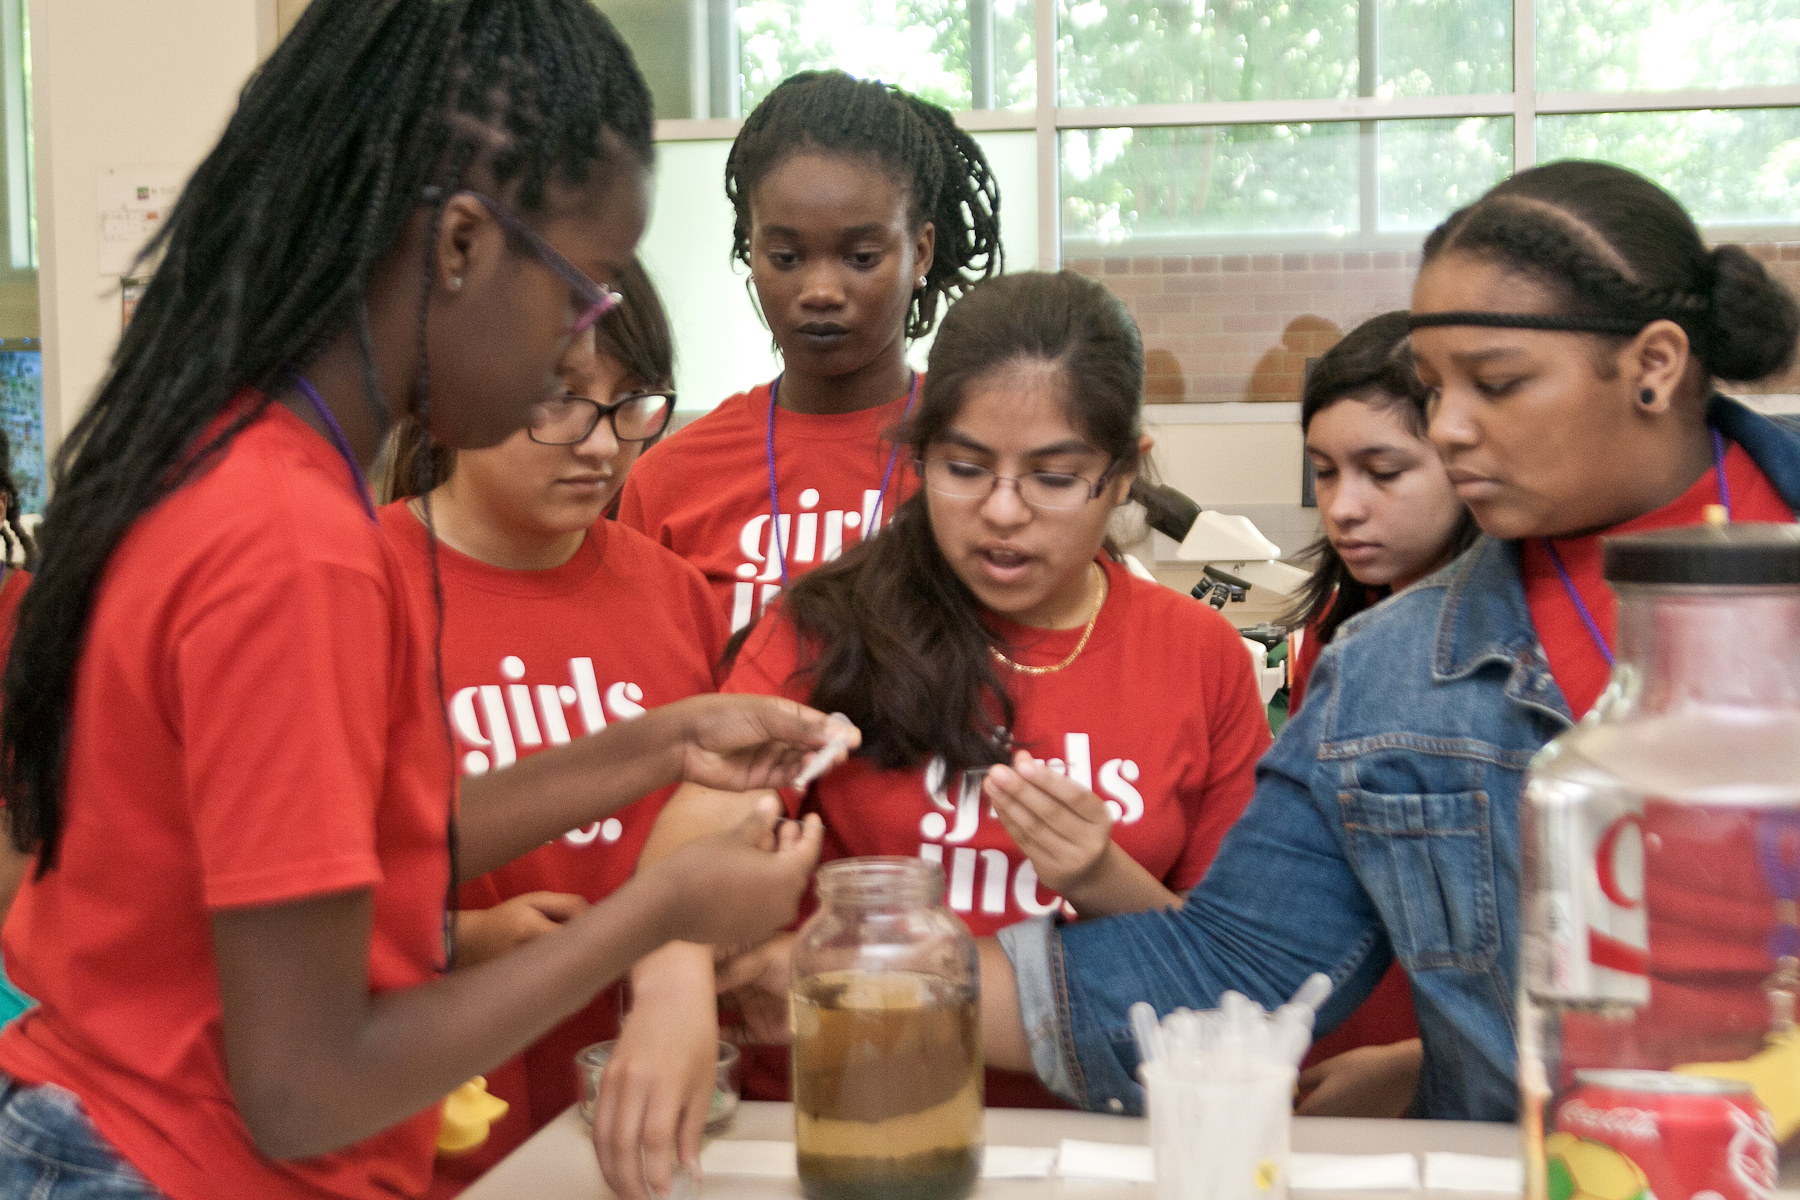 Richland College partners with Girls Inc. to provide middle school girls a glimpse into college life and access to STEM programs and careers